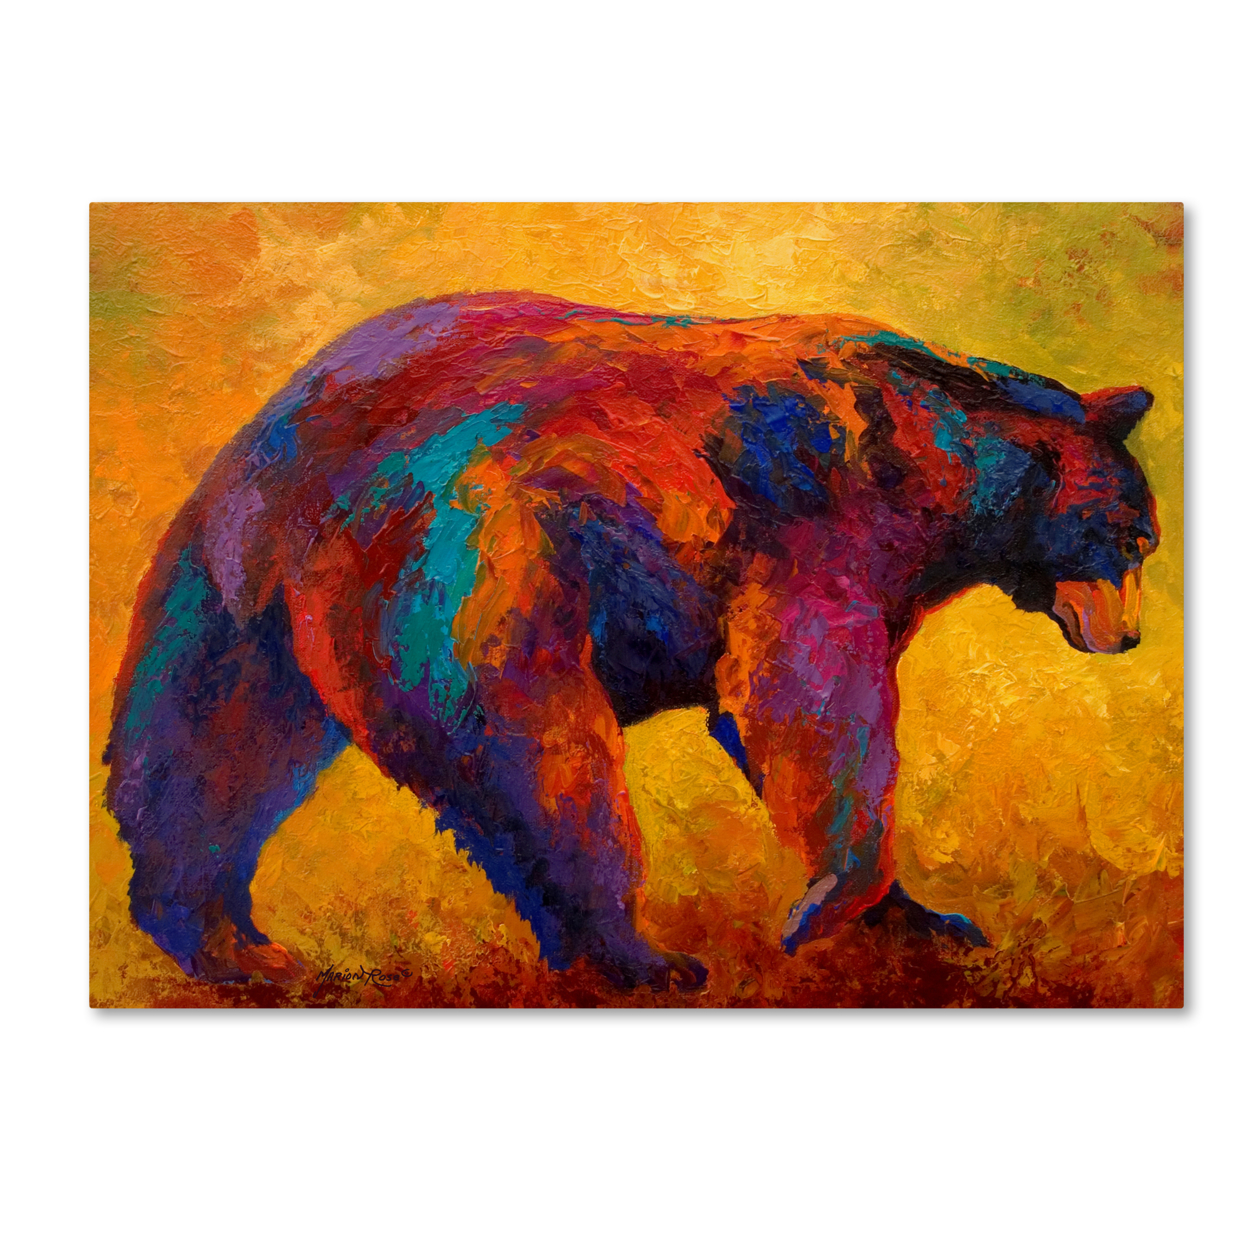 Marion Rose 'Daily Rounds Black Bear' Ready To Hang Canvas Art 18 X 24 Inches Made In USA